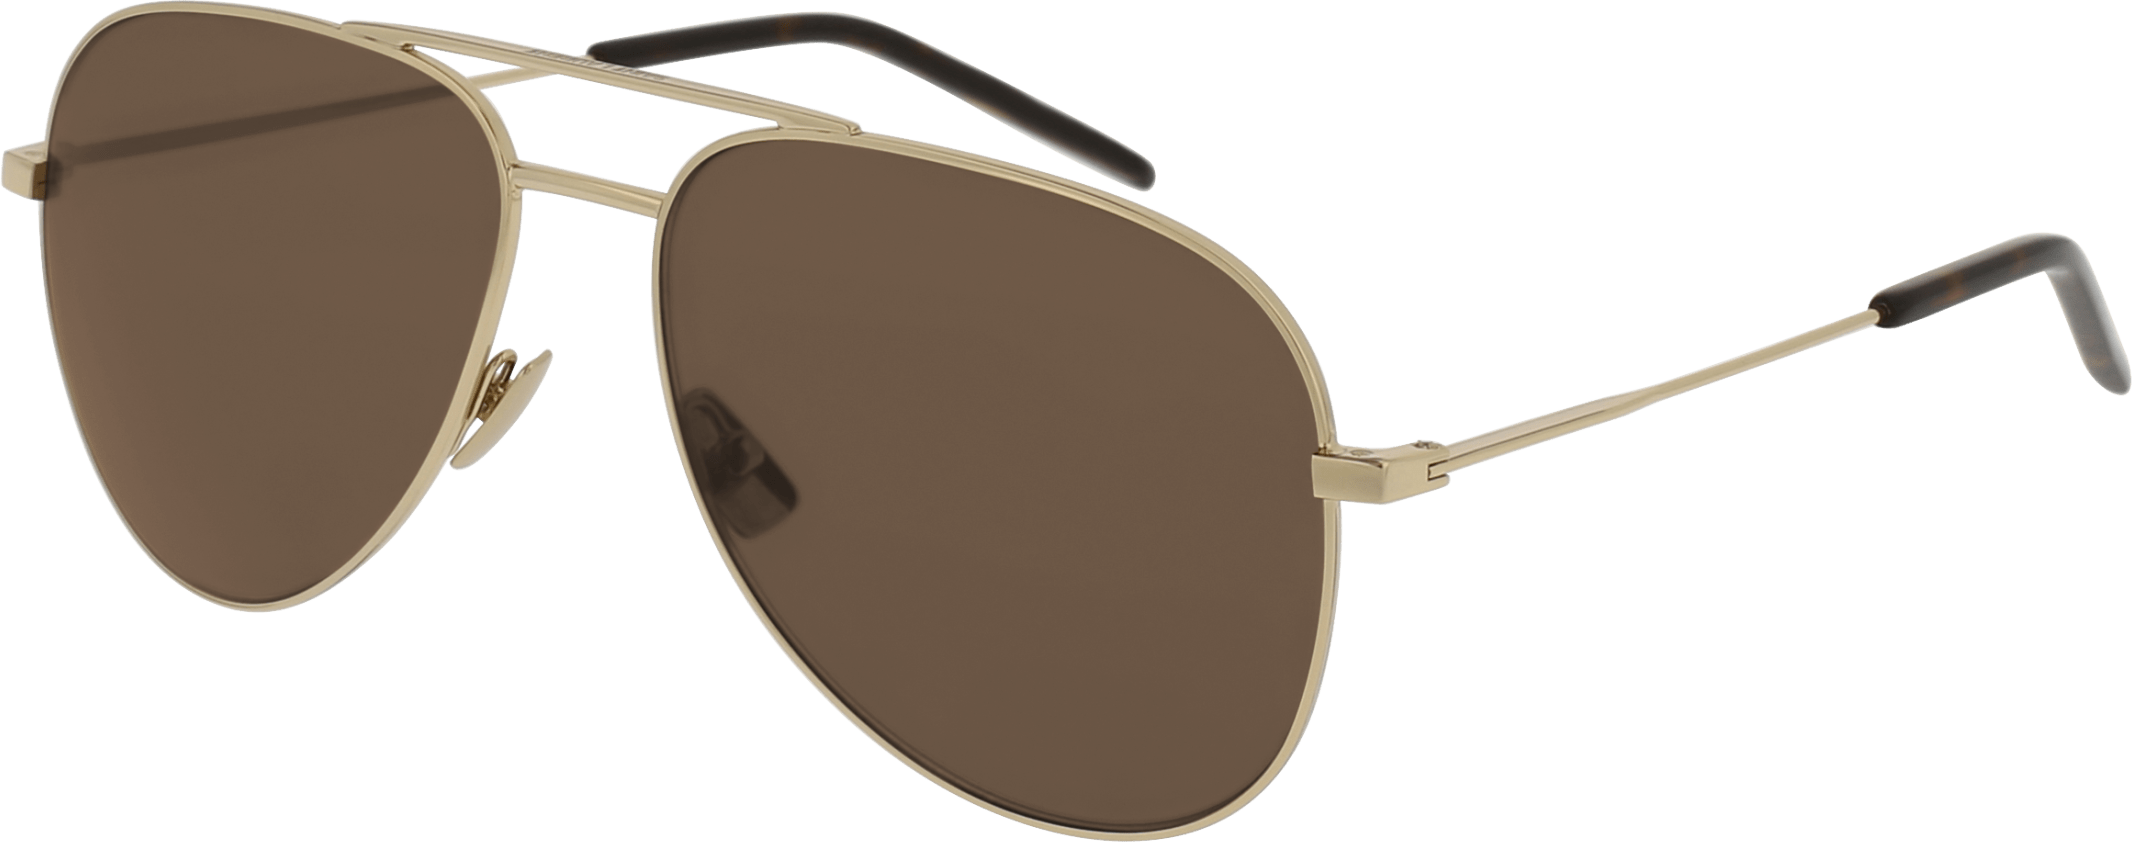 Color_CLASSIC 11-014 - GOLD - BROWN - POLARIZED